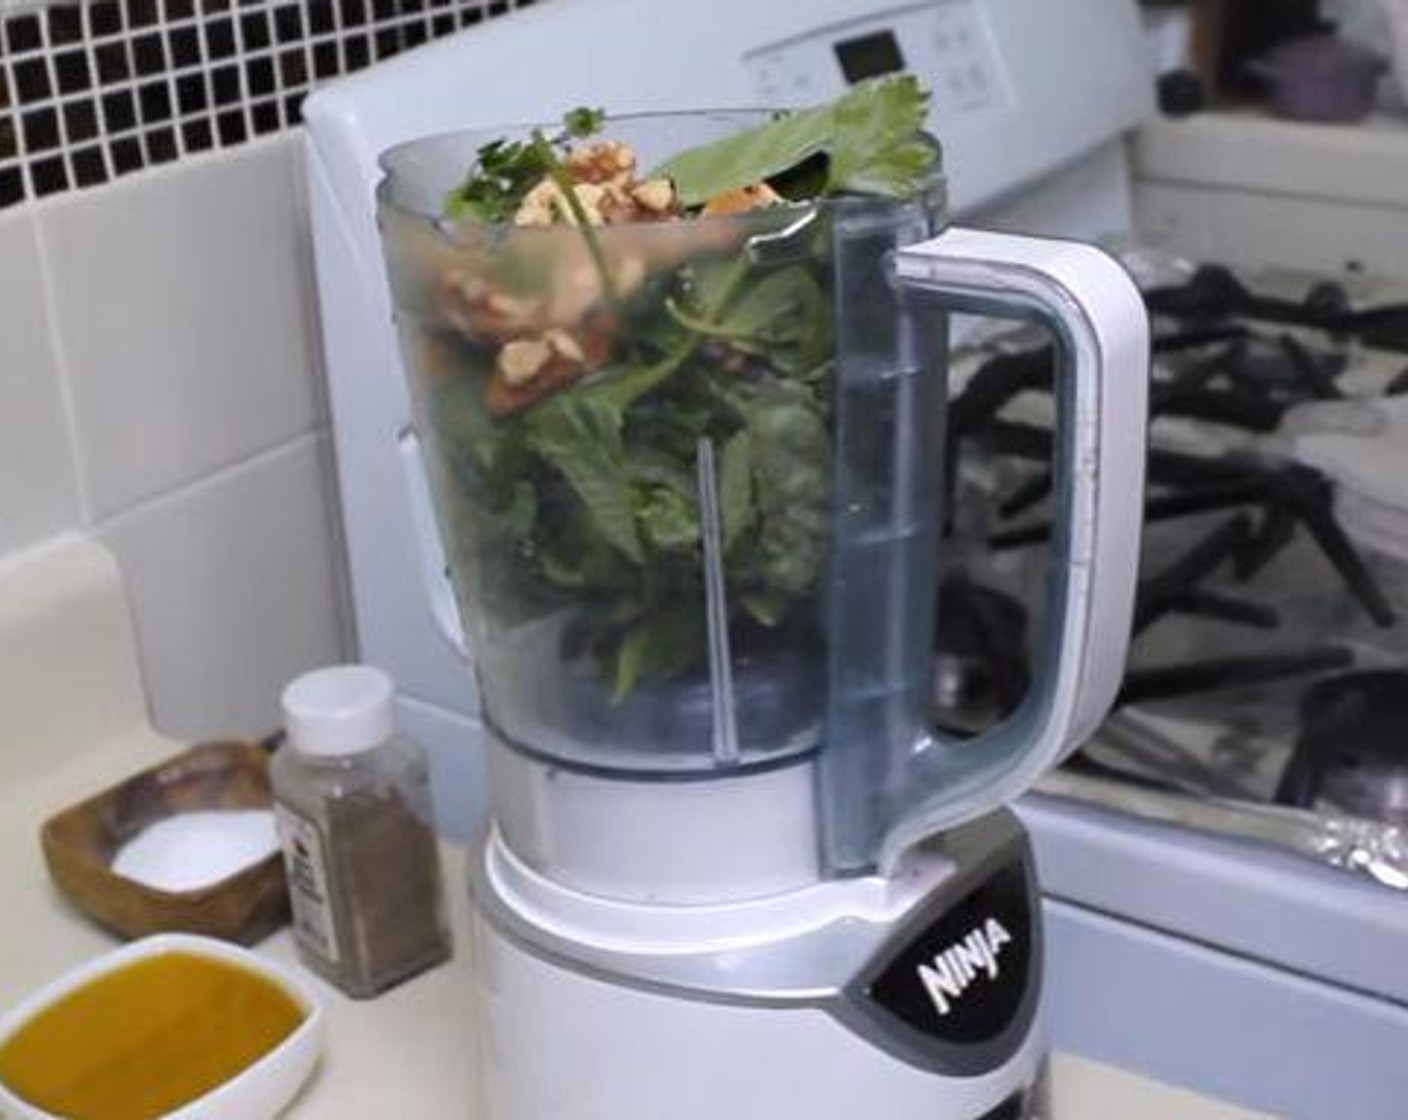 step 1 In a food processor, or a blender if none are available, add the fresh Fresh Basil (3 cups), fresh Fresh Parsley (1 cup), Walnut (1/4 cup), Garlic (3 cloves), and Grated Parmesan Cheese (1/4 cup). Zest and juice the Lemon (1) into the processor and turn it on.